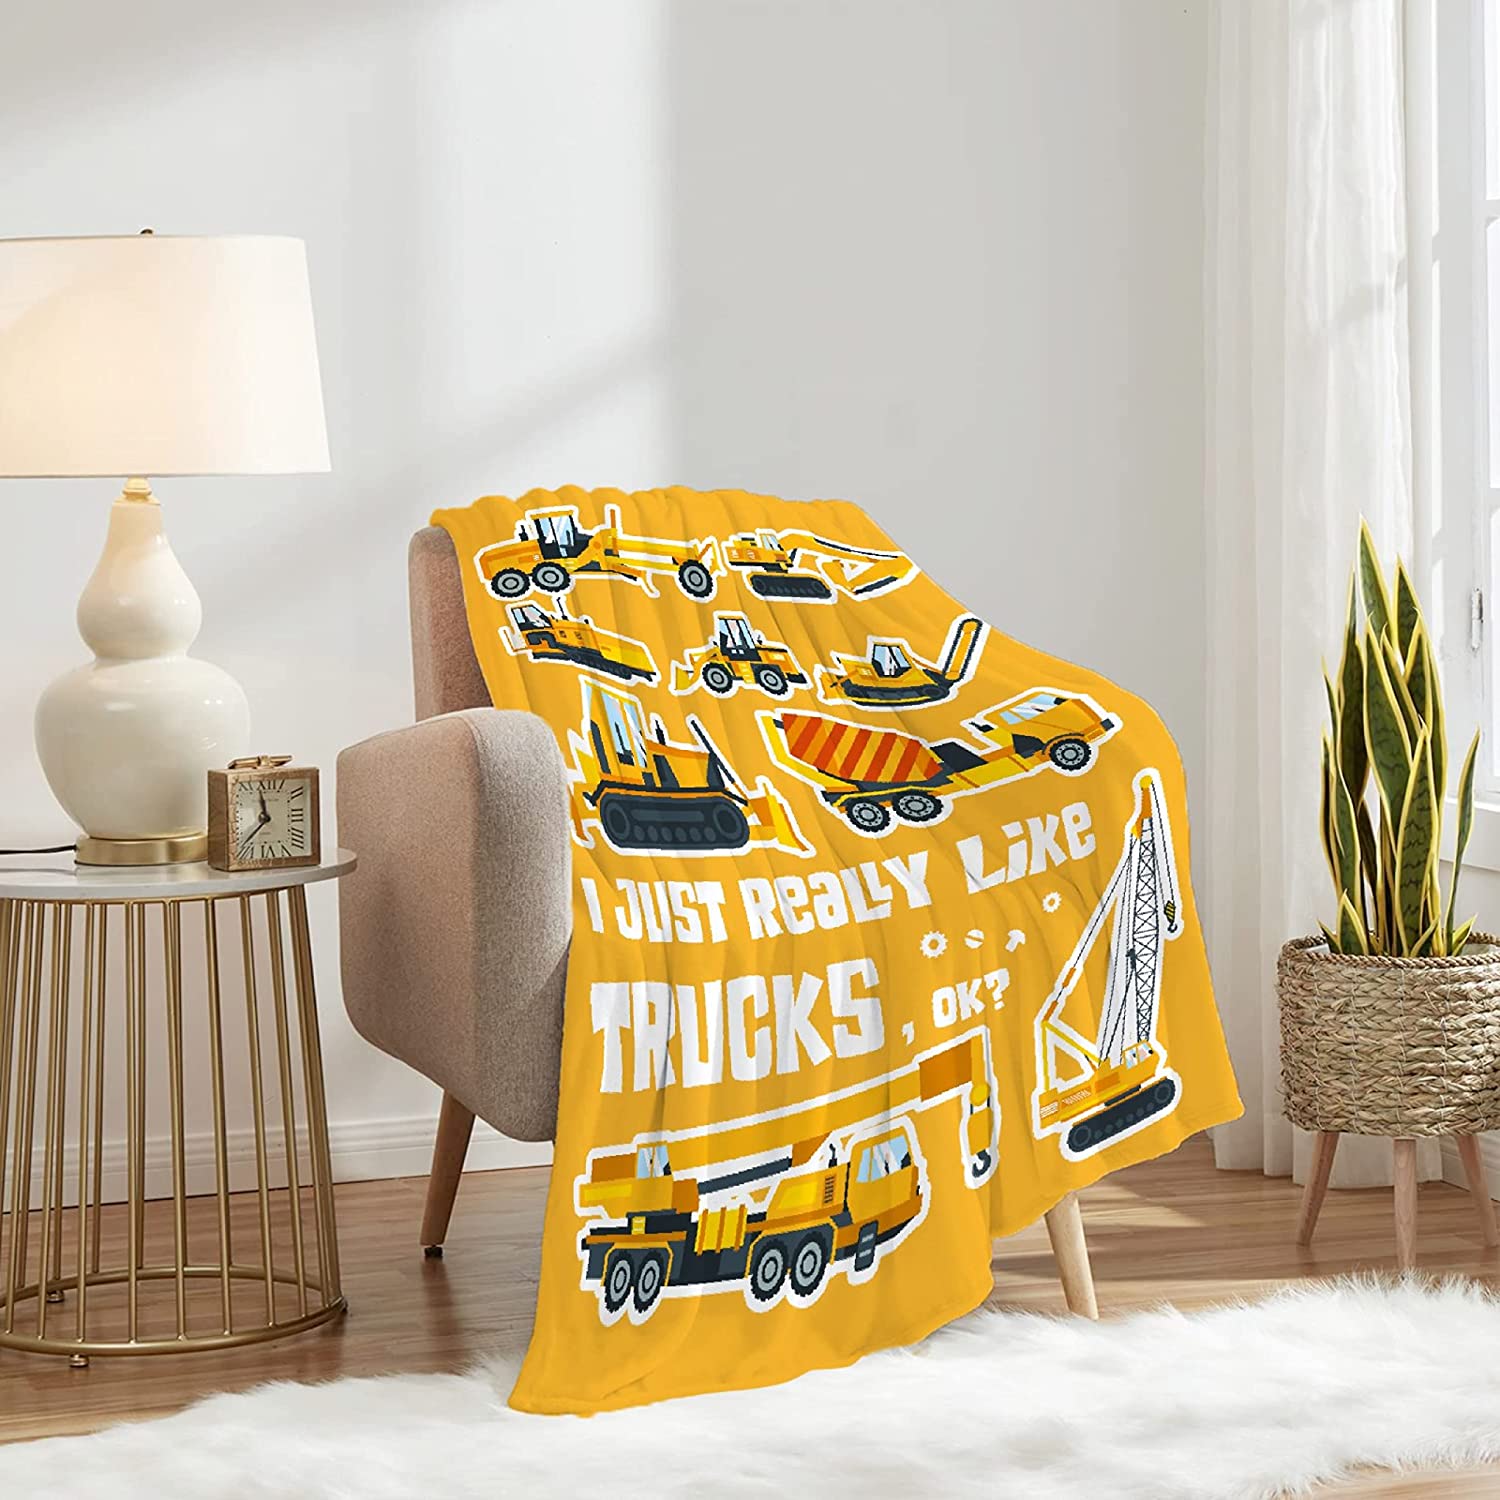 Trucks Blanket, I Just Really Like Trucks, Ok? Throw Blanket for Girls Boys Gifts, Ultral Soft Cozy Warm Flannel Fleece Suit for Sofa, Couch, Bed, Travel, Sofa 80"x60" L Blanket for Adults - image 3 of 6